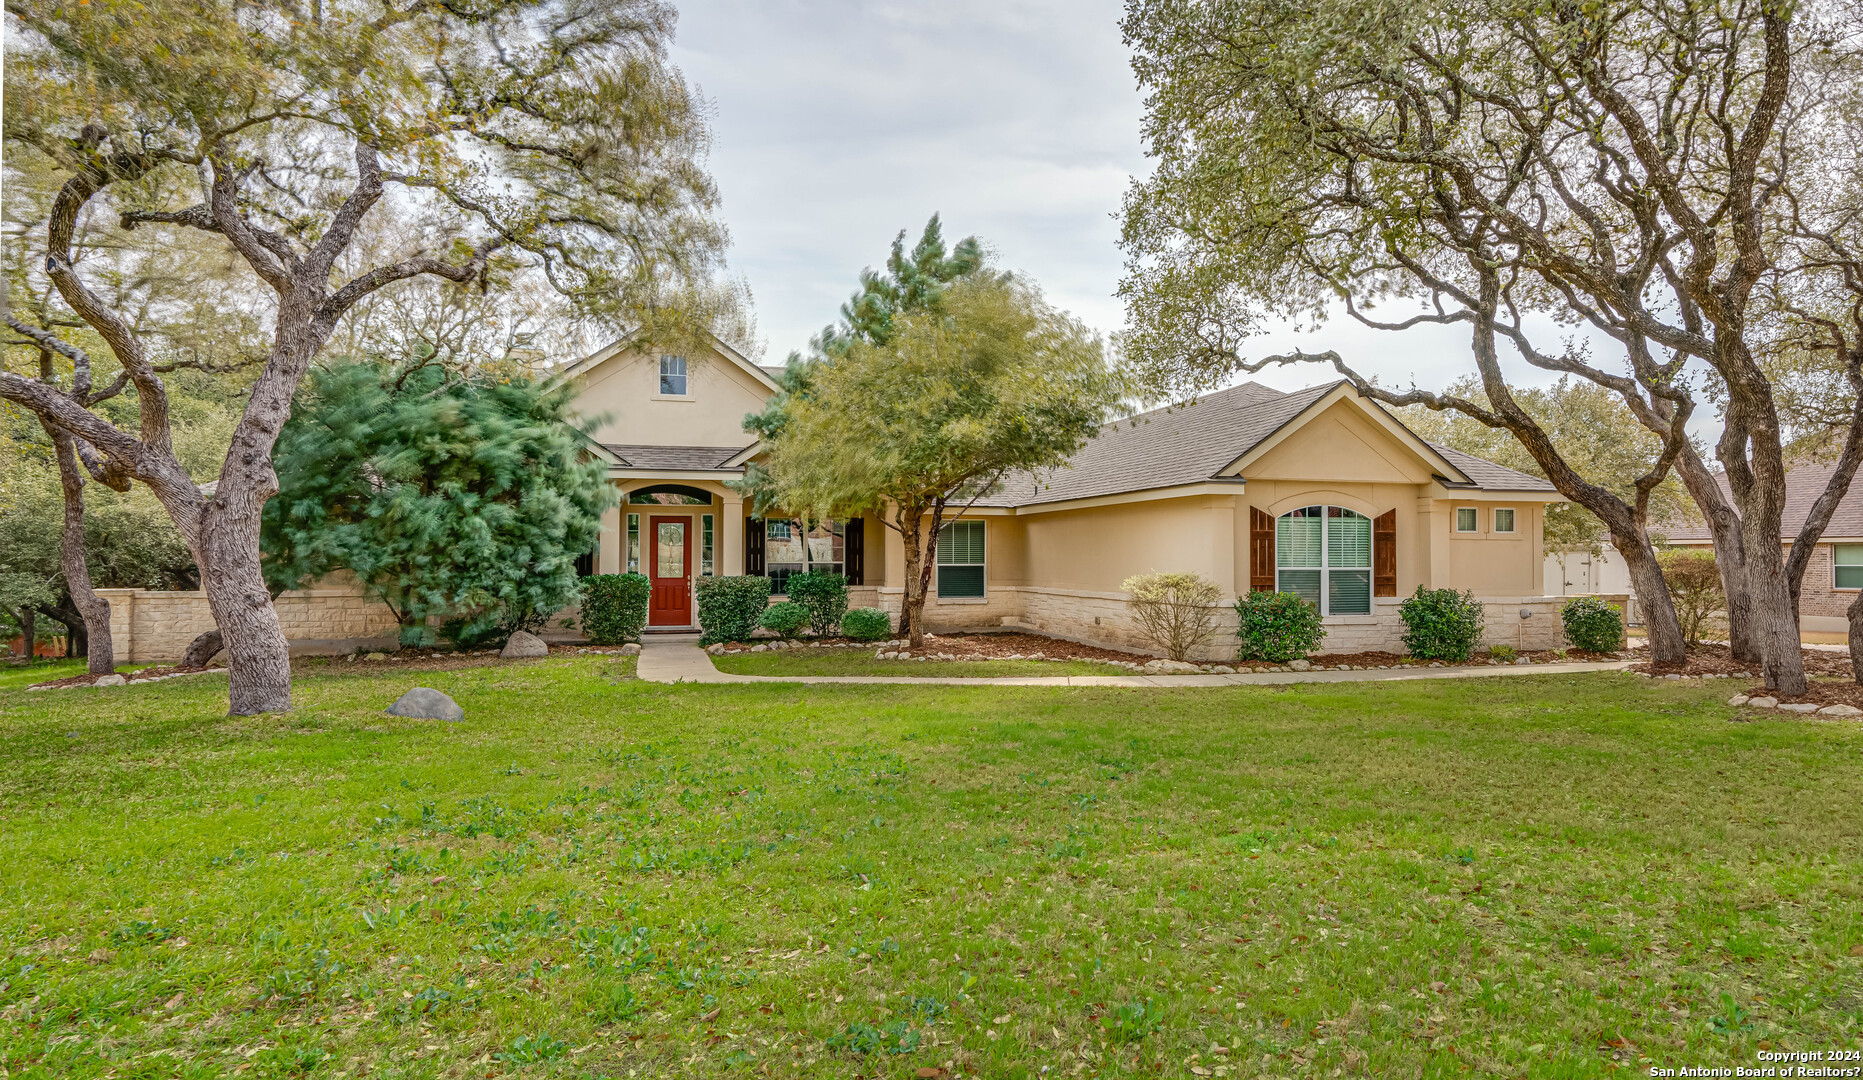 Photo of 11530 Paynes Gray in Helotes, TX